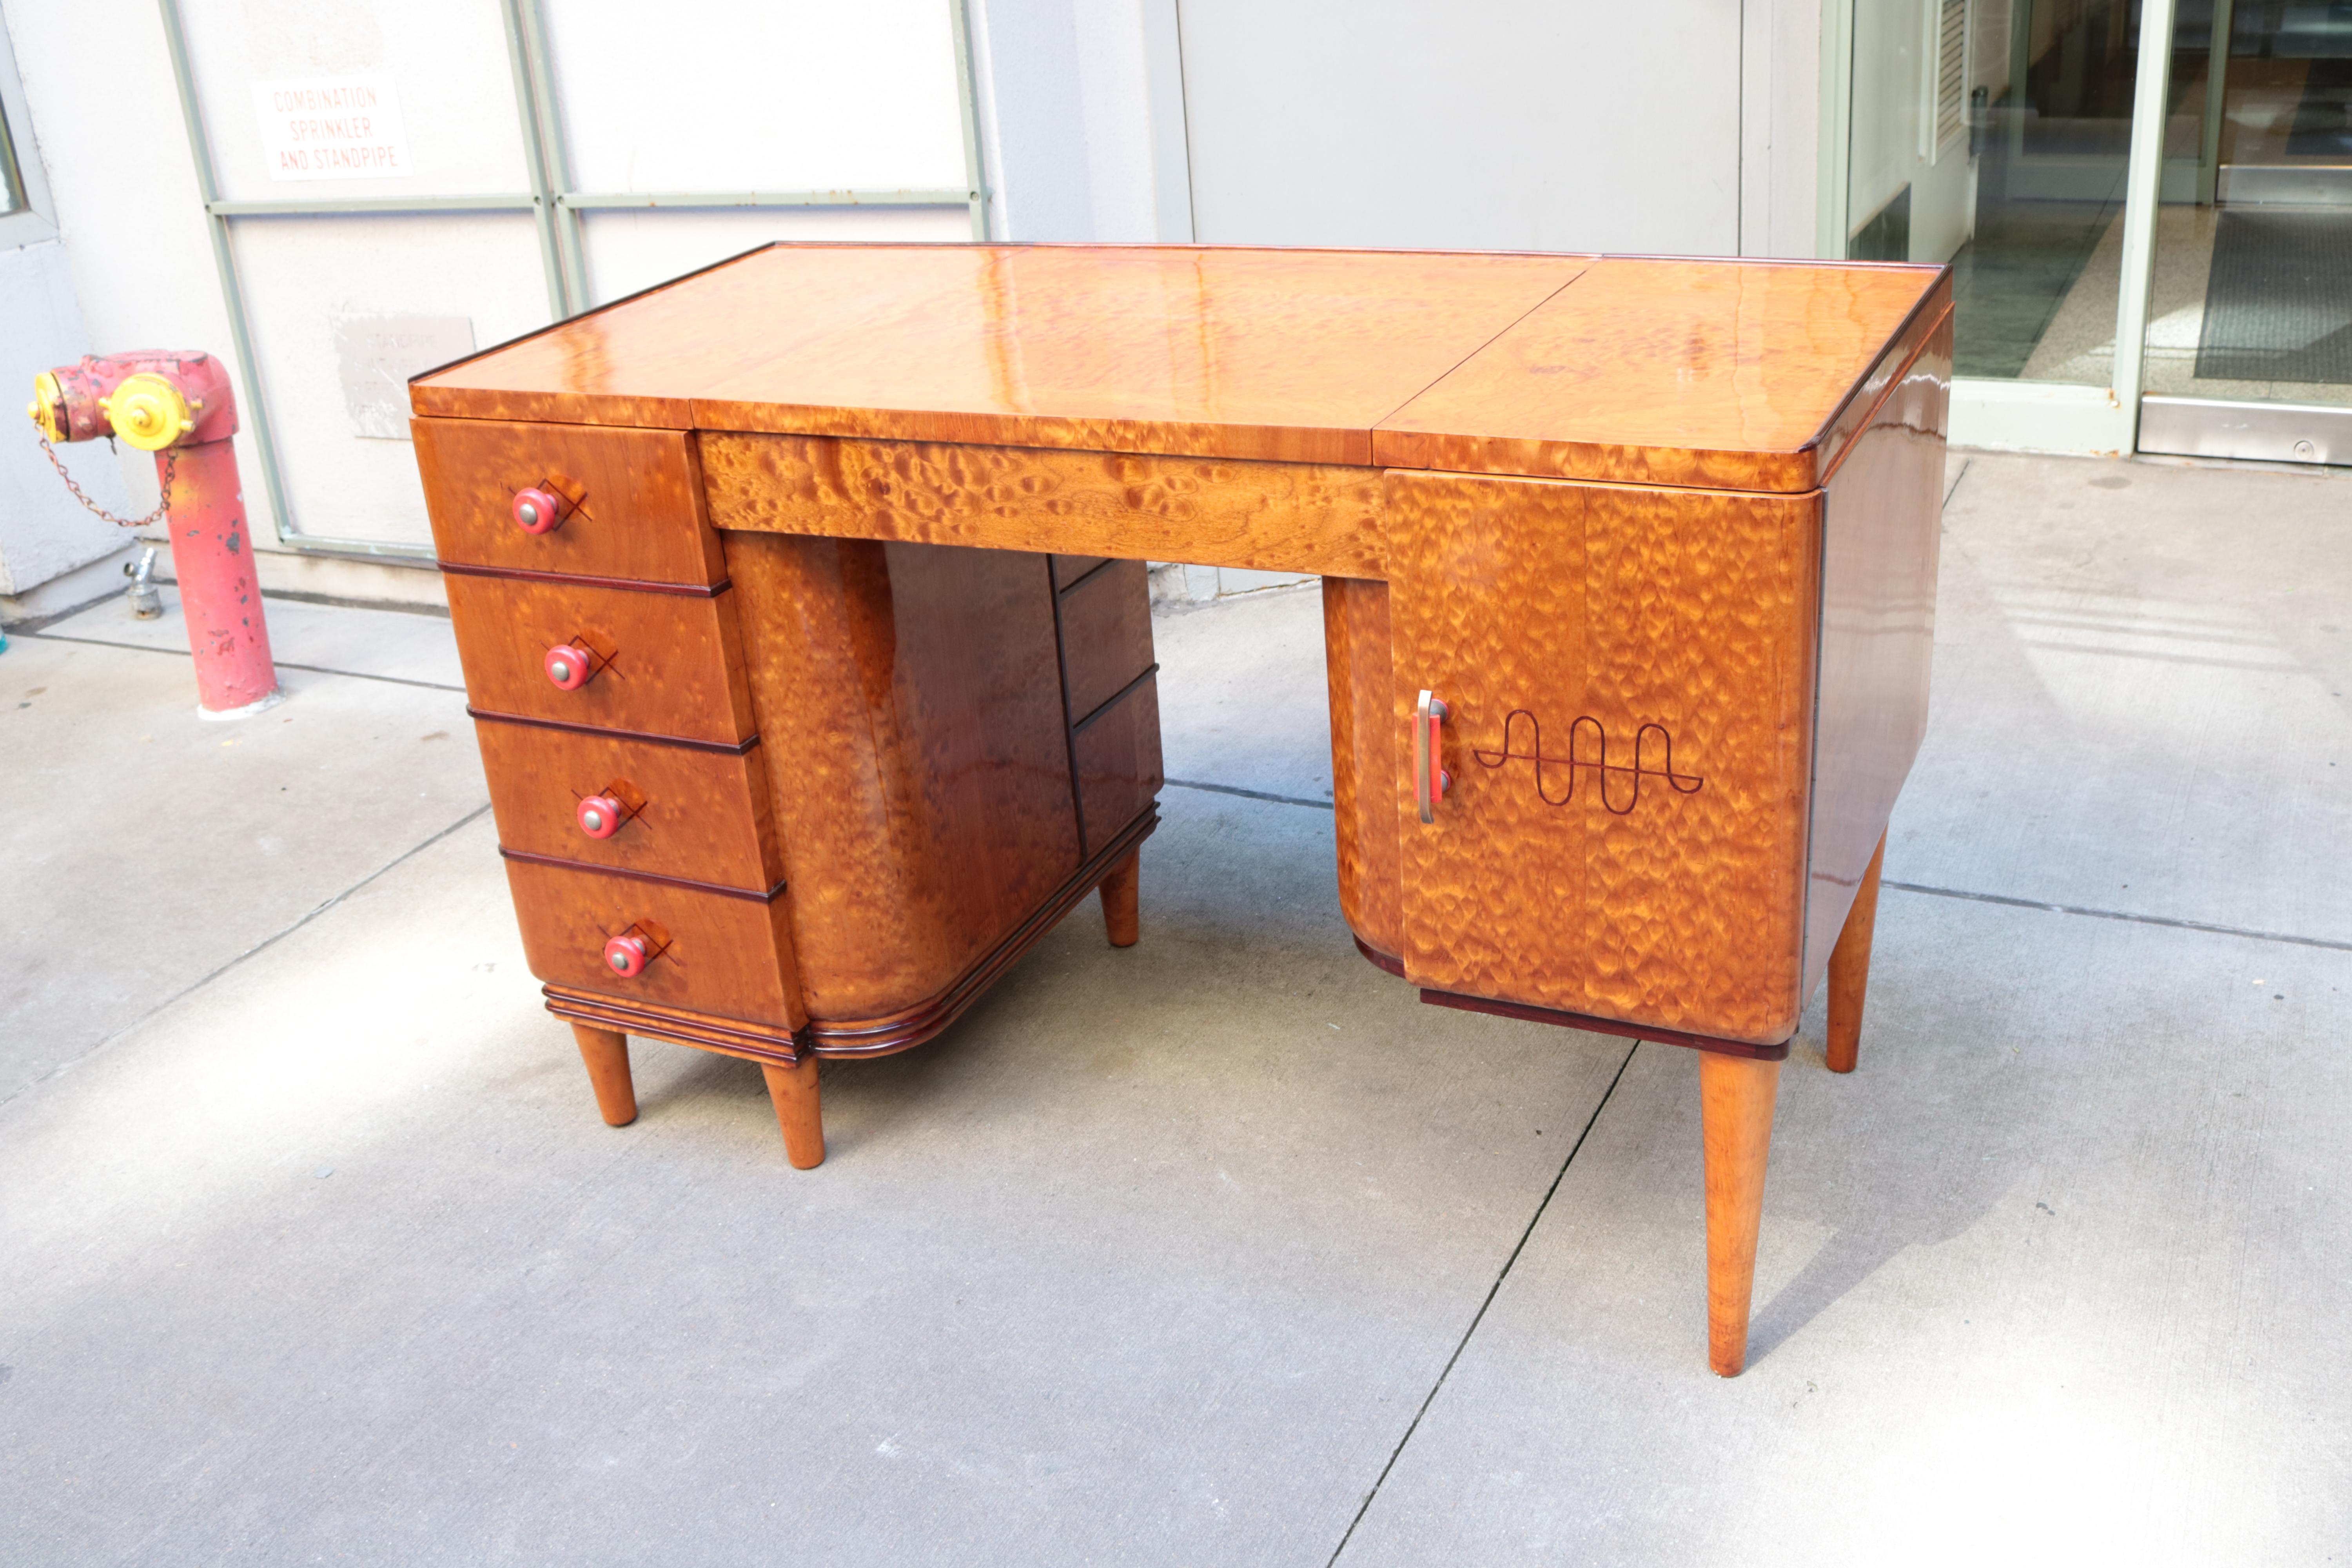 An Art Deco small desk. Amboyna with inlaid details, 
red bakelite and brass pulls. Desk features four drawers 
a storage cabinet and an additional storage area underneath a lift up top.